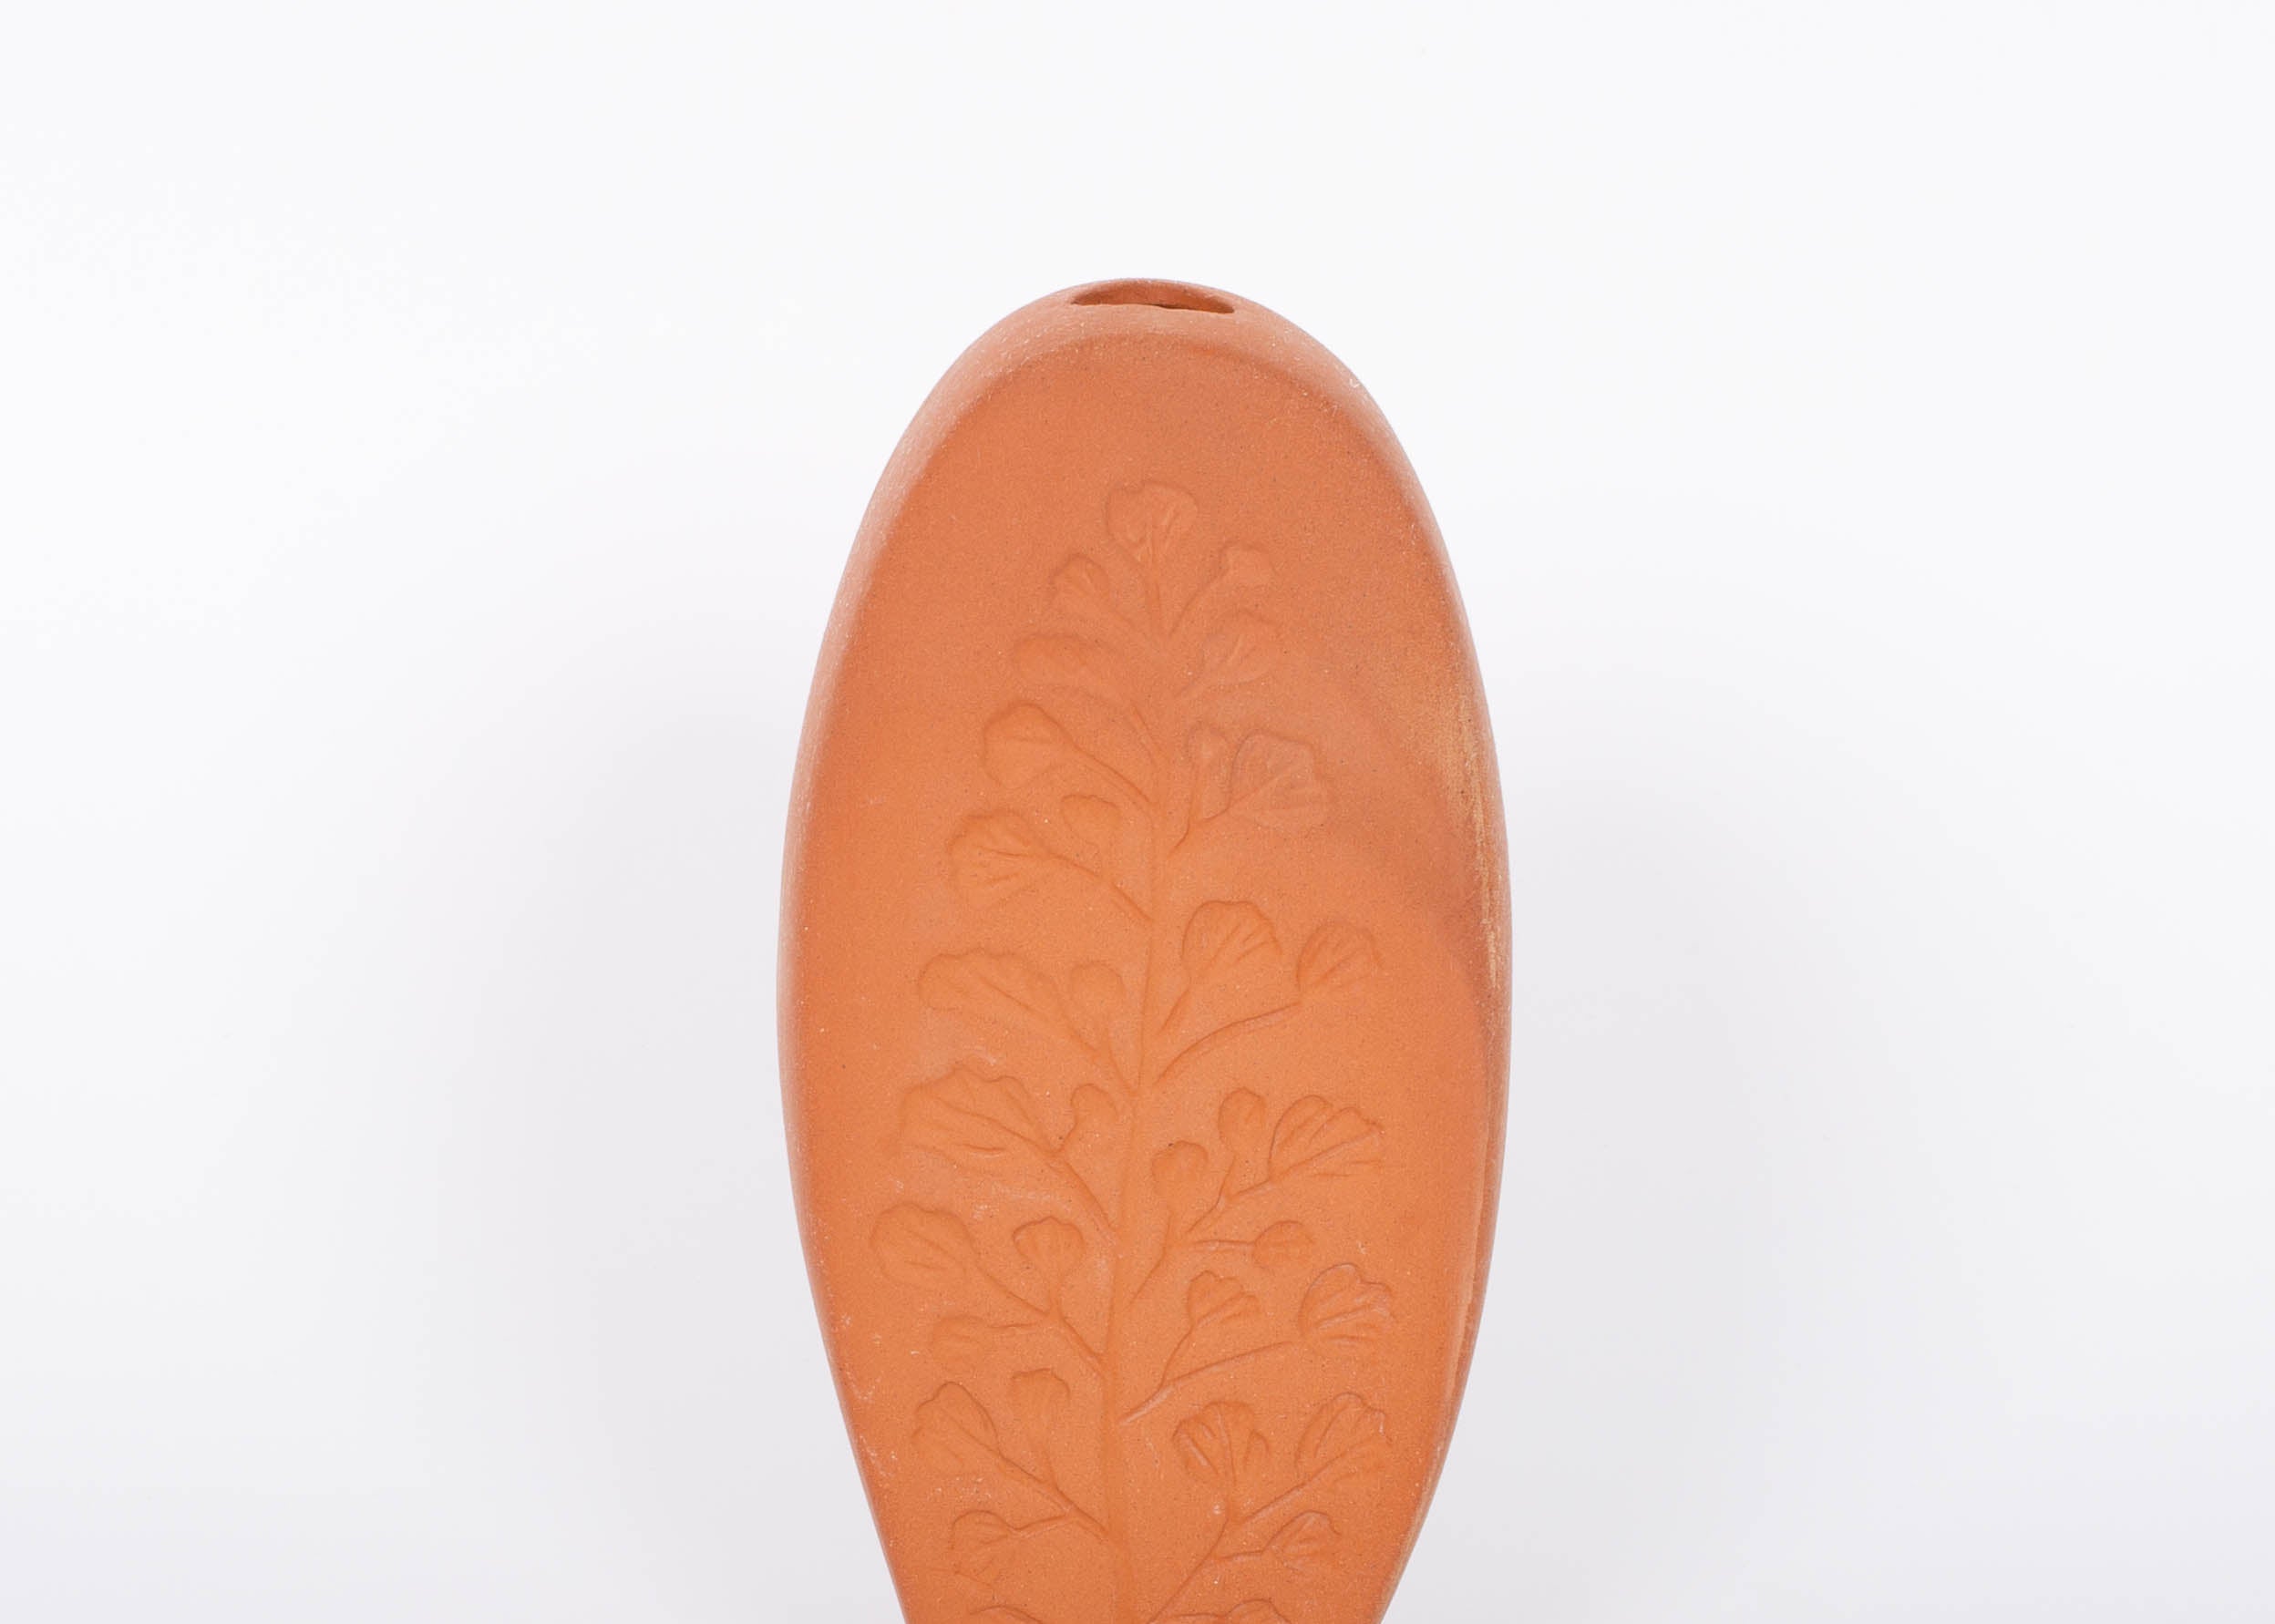 Tall oval Poppy Budvase in terracotta geometric silhouette with imprint of live plant. White background.